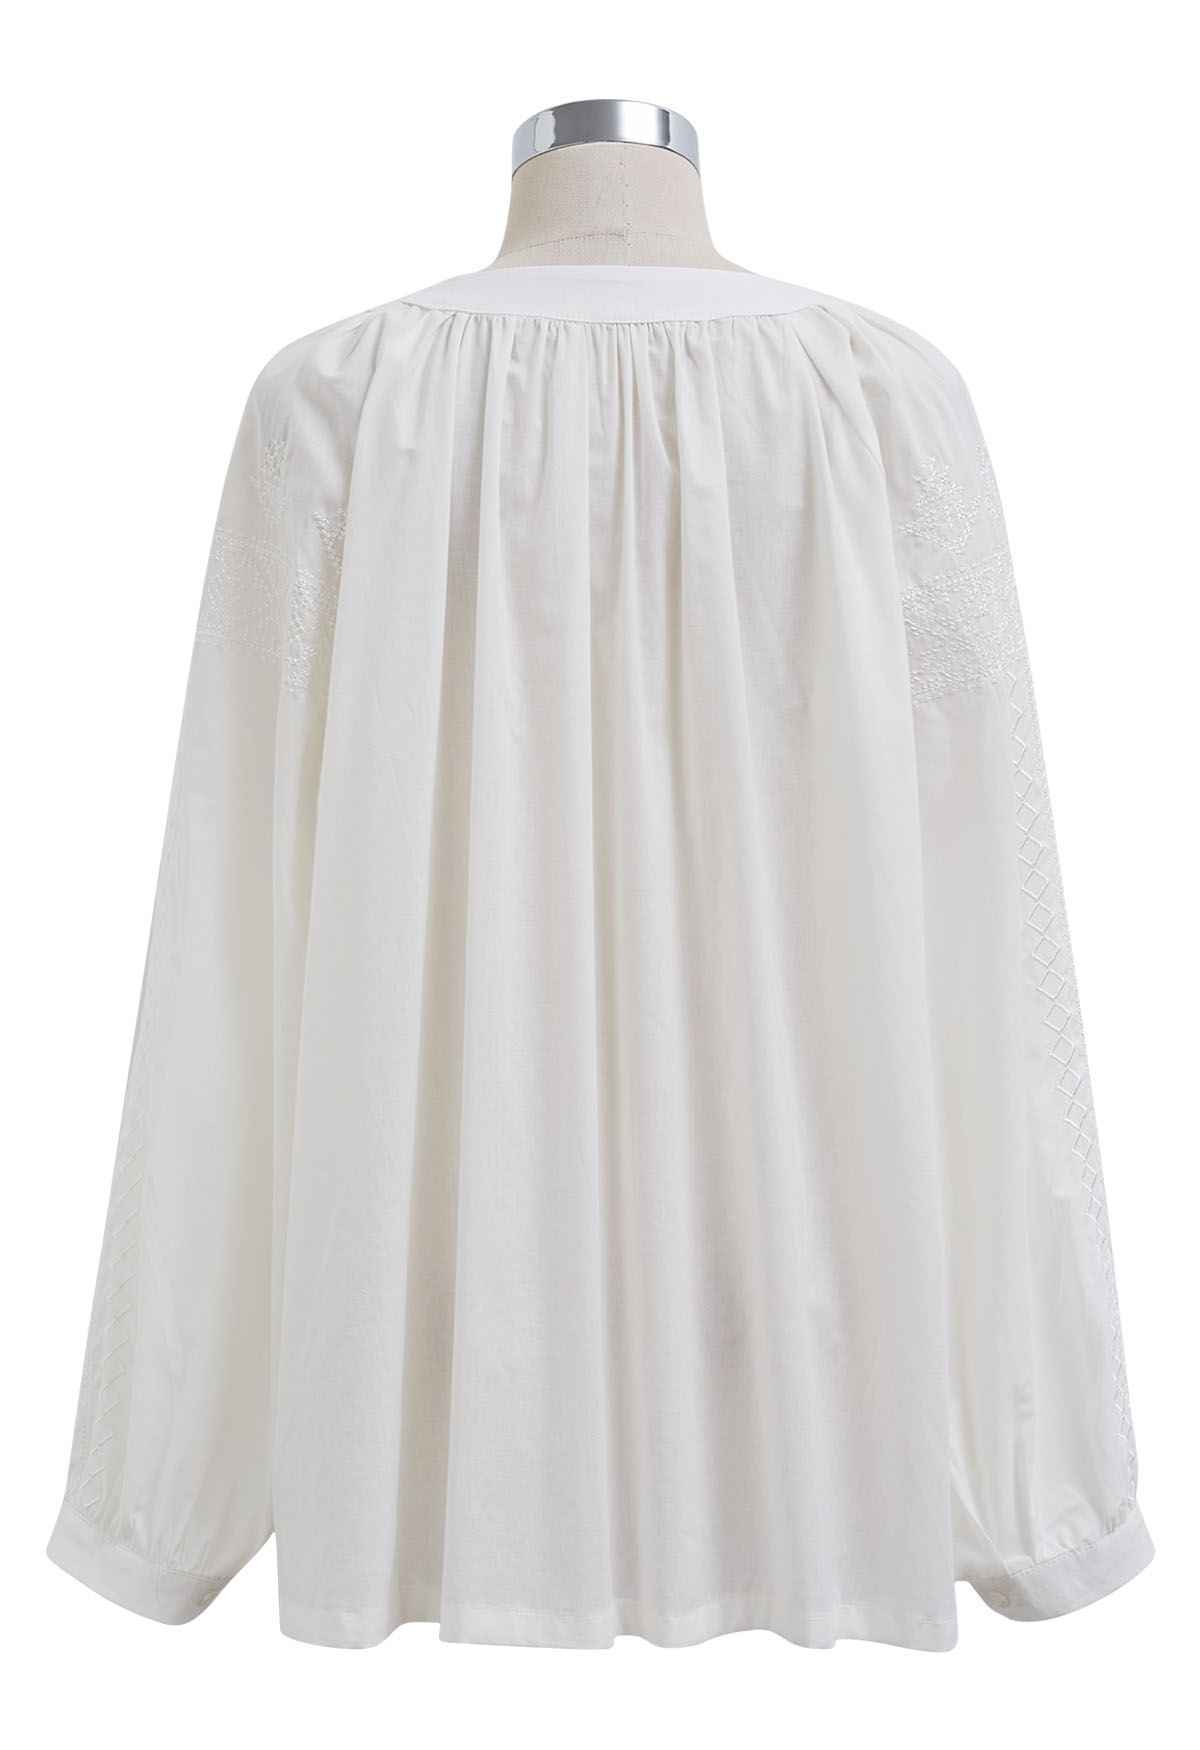 Tassel String Embroidered Cotton Top in White